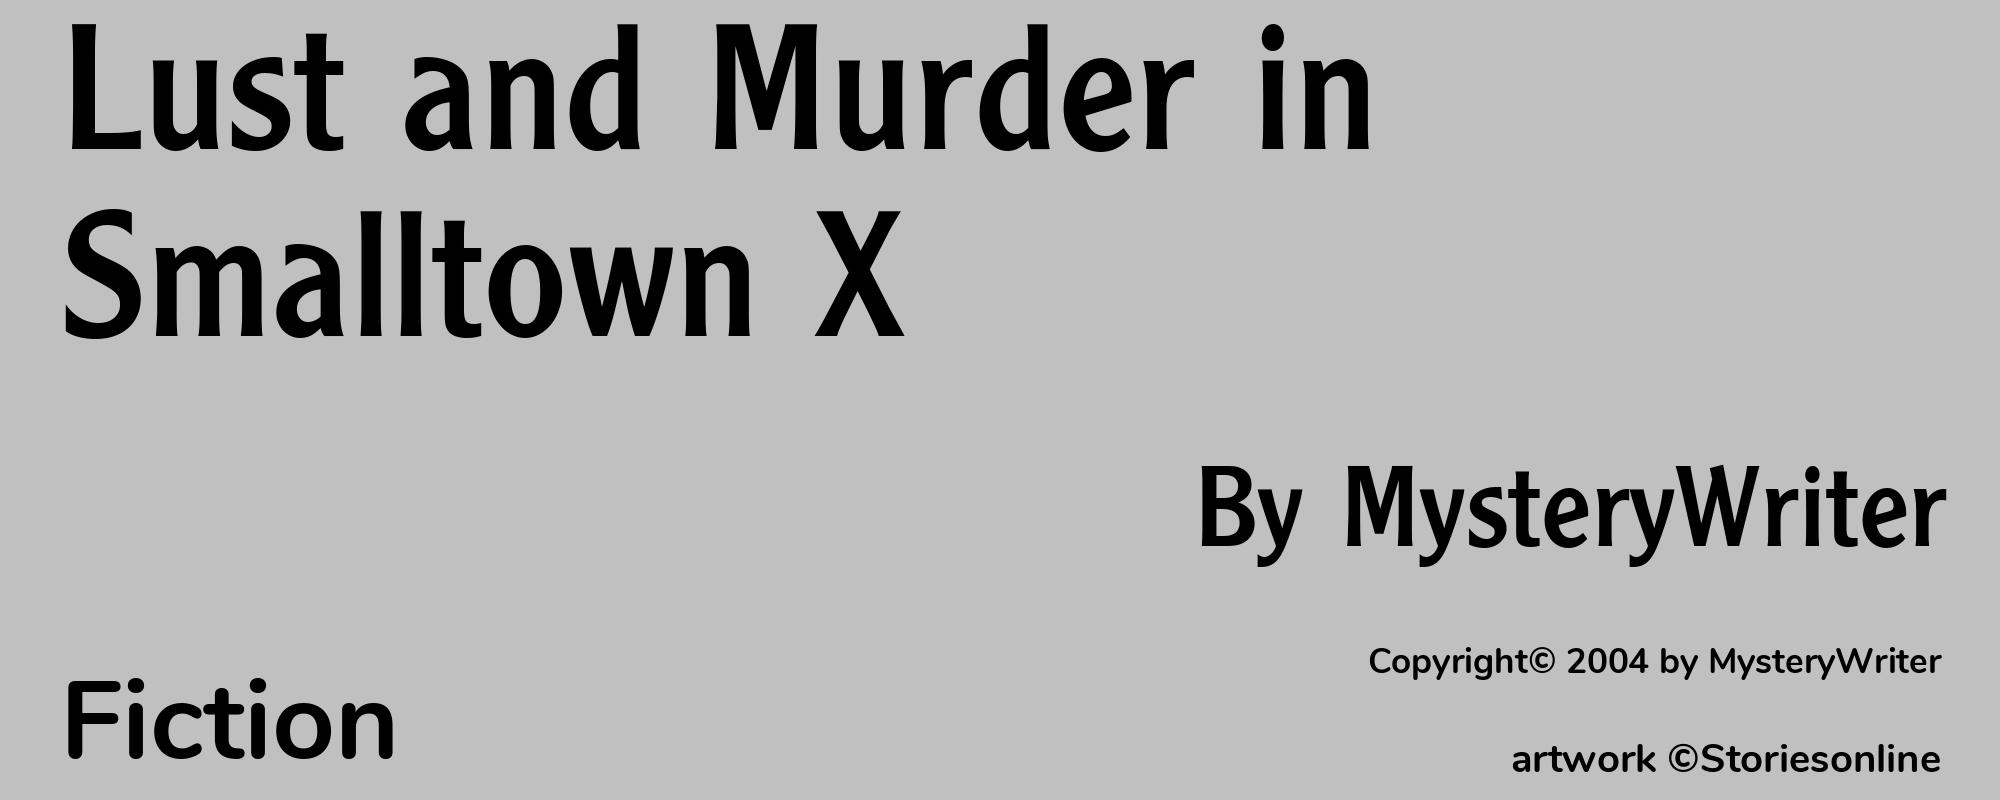 Lust and Murder in Smalltown X - Cover